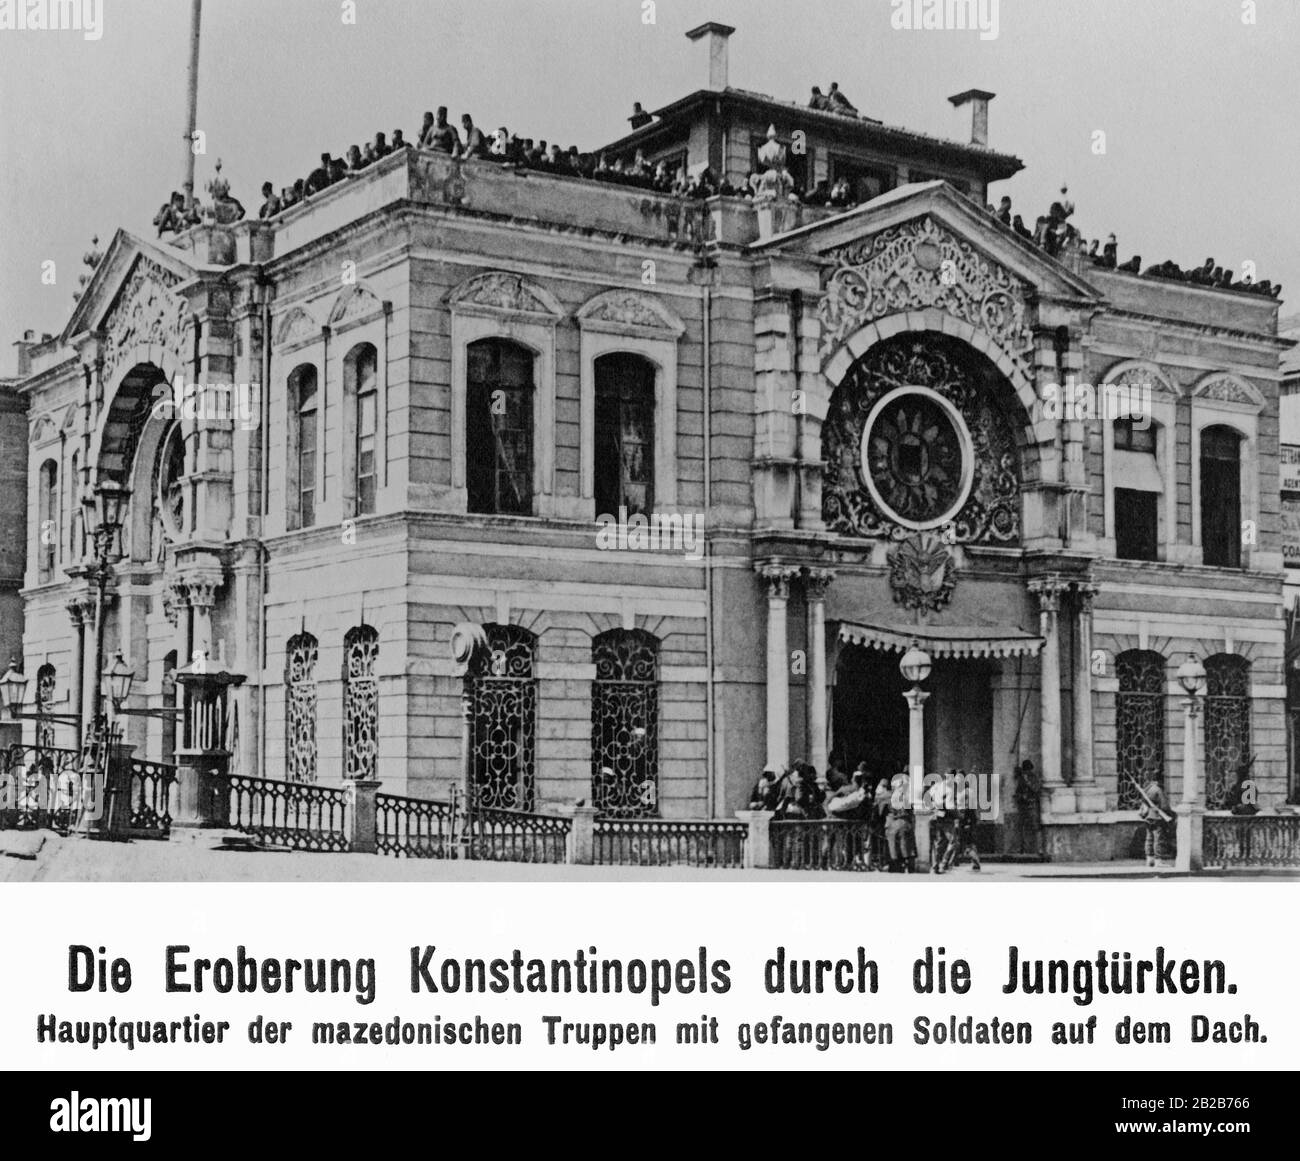 Headquarters of the Macedonian troops with captured soldiers on the roof. The 'Committee for Unity and Progress' forced the reinstatement of the 1876 Constitution and the assembly of the parliament. They also replaced Sultan Abdul Hamid II with his brother Mehmed V. Stock Photo